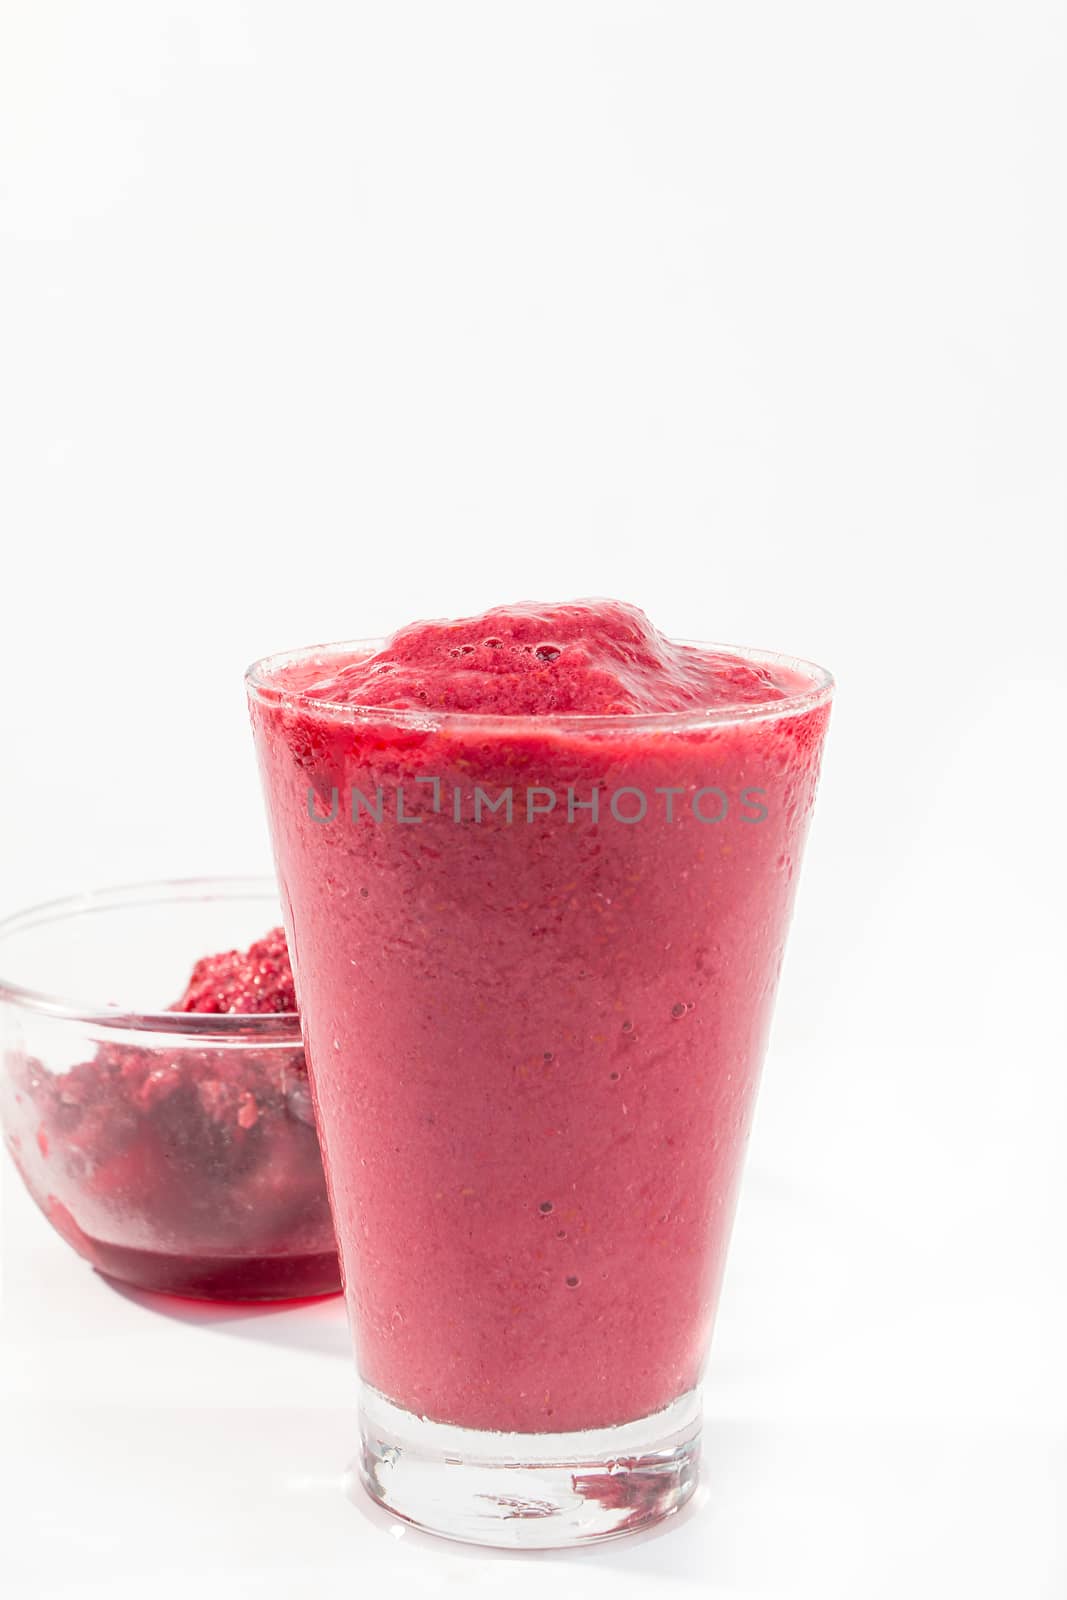 raspberry smoothis by wyoosumran